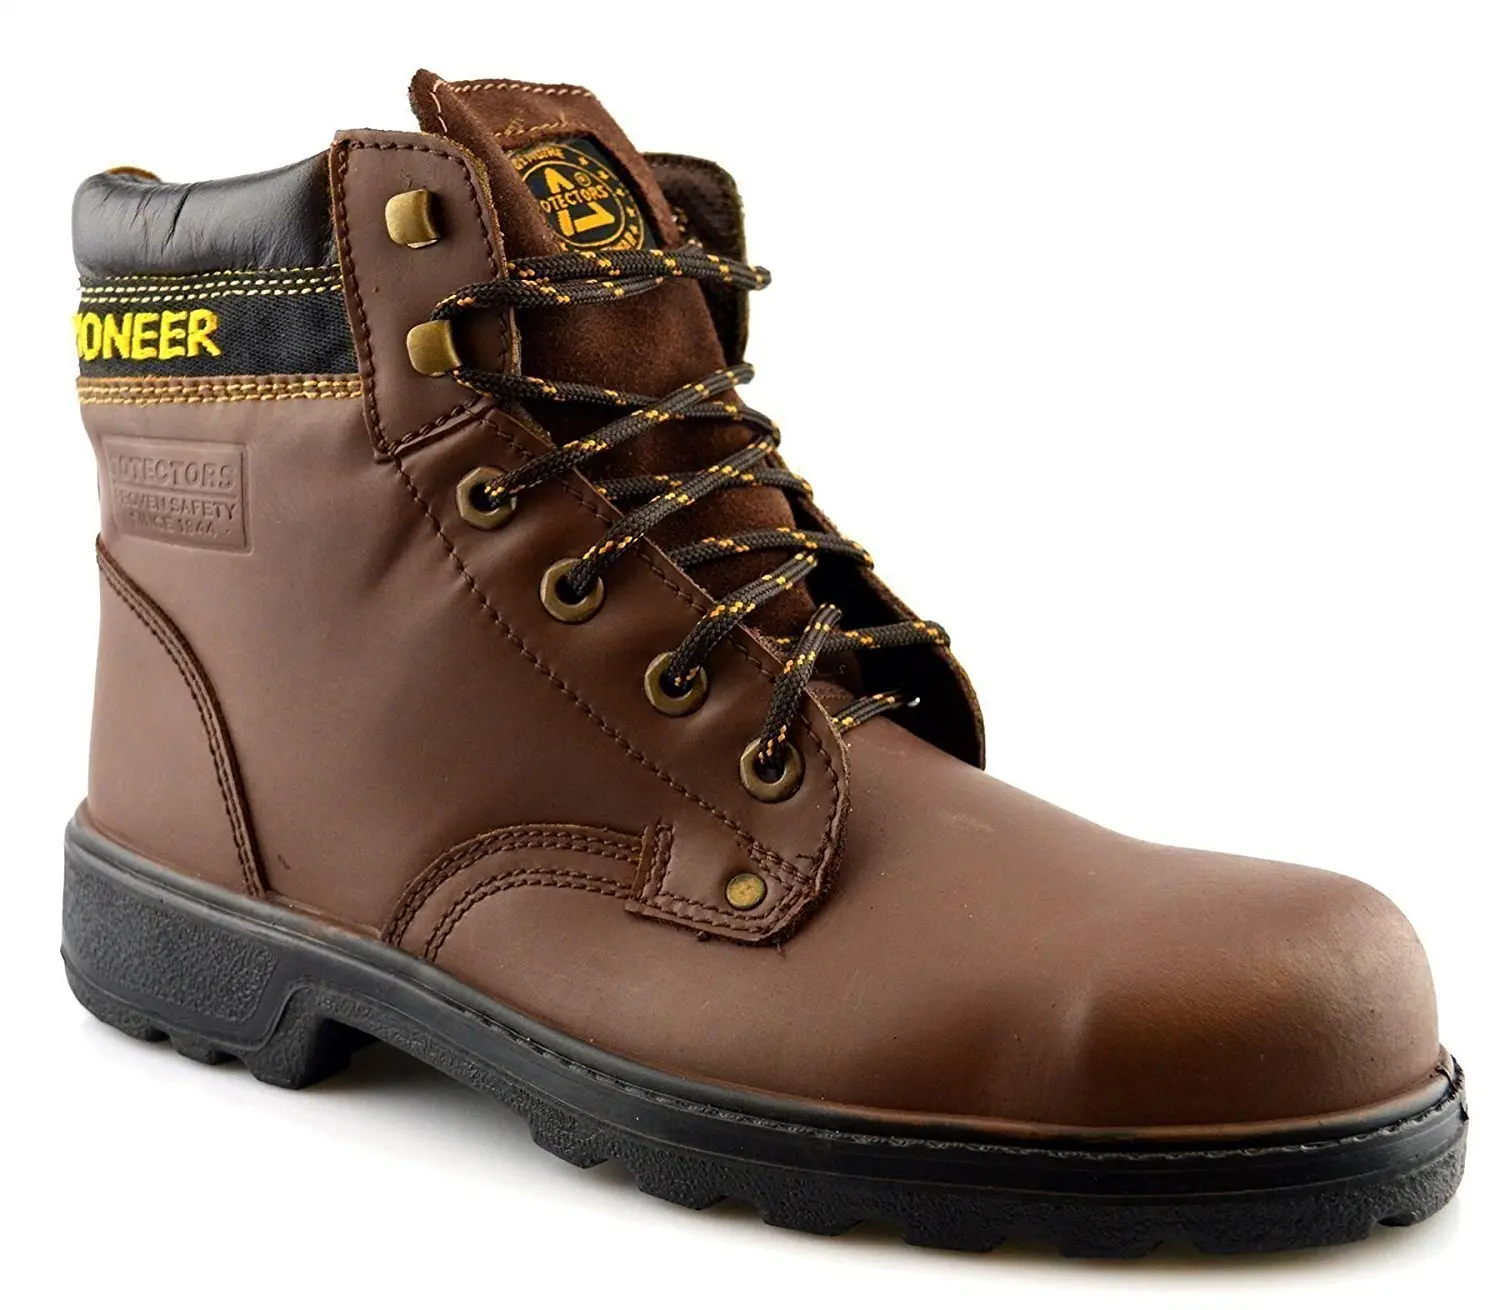 totector safety shoes